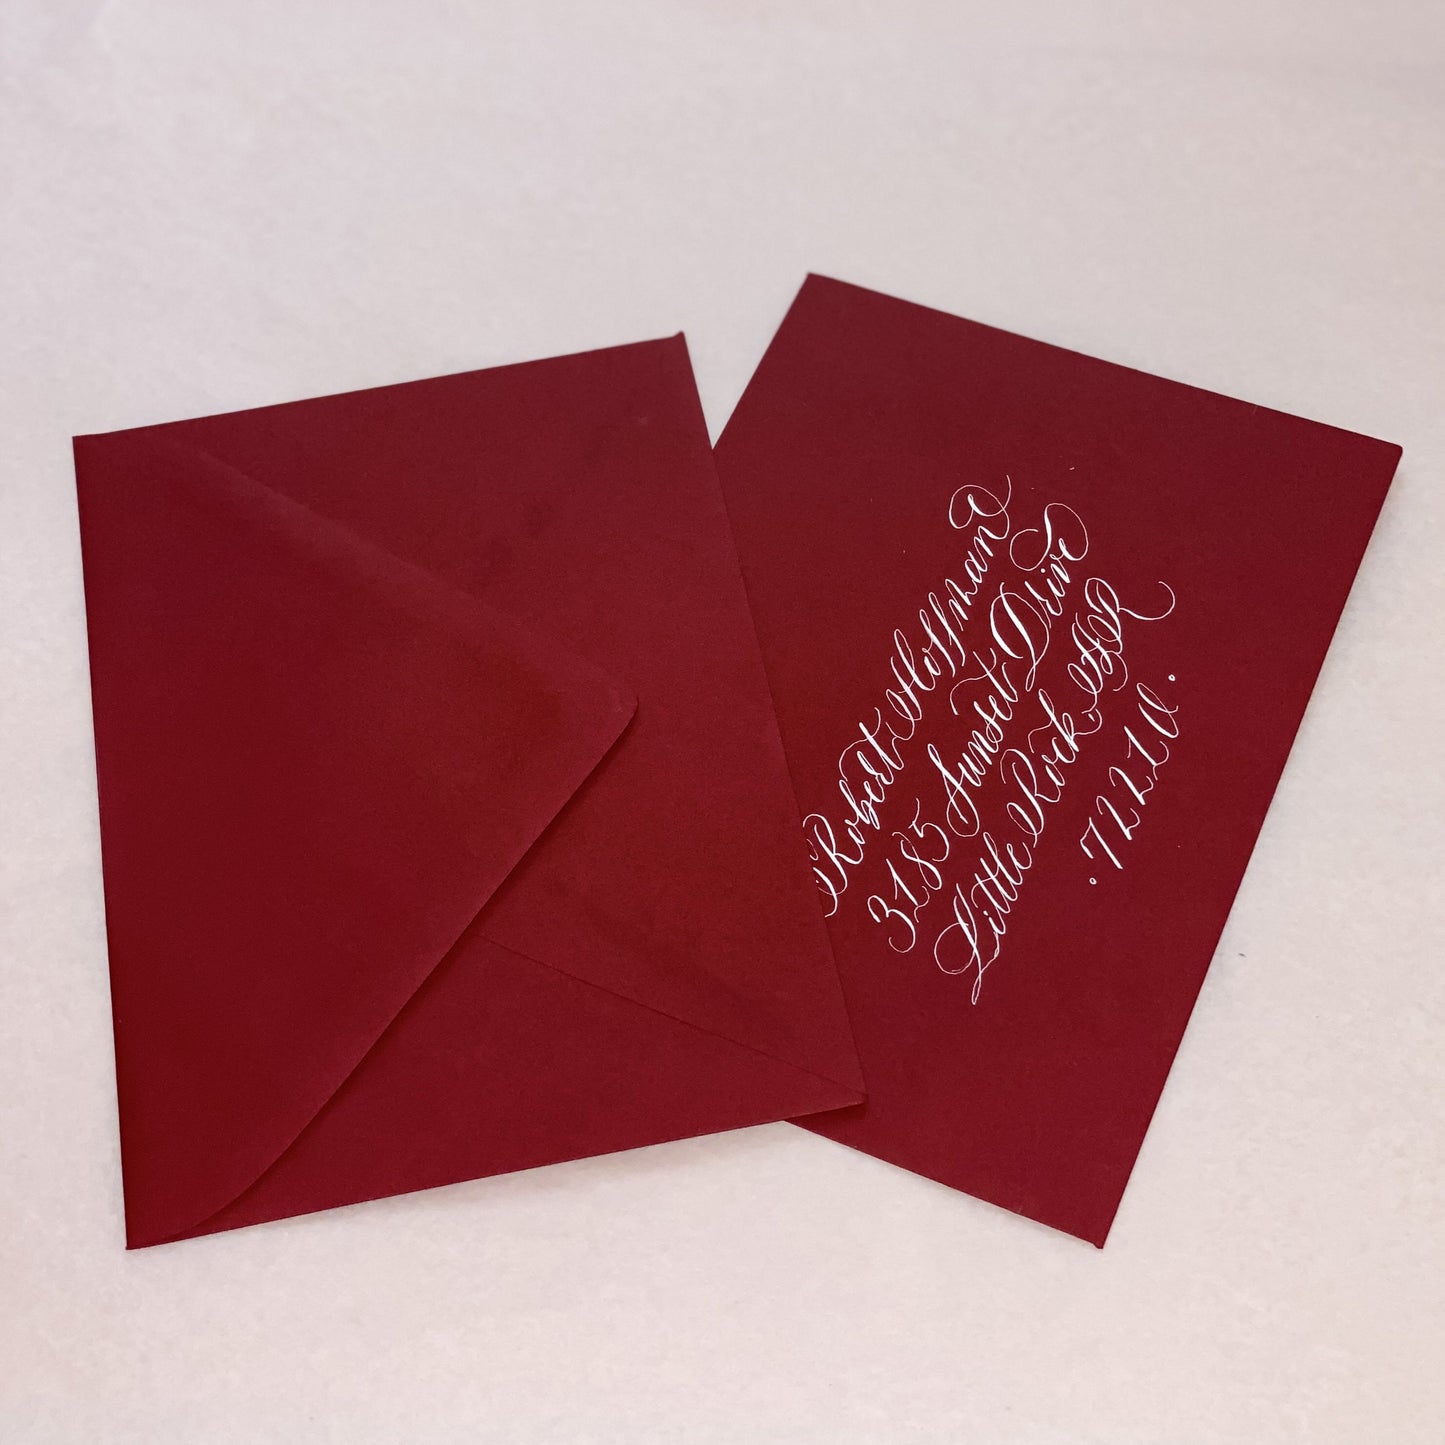 Red European Flap Envelope With White Calligraphy